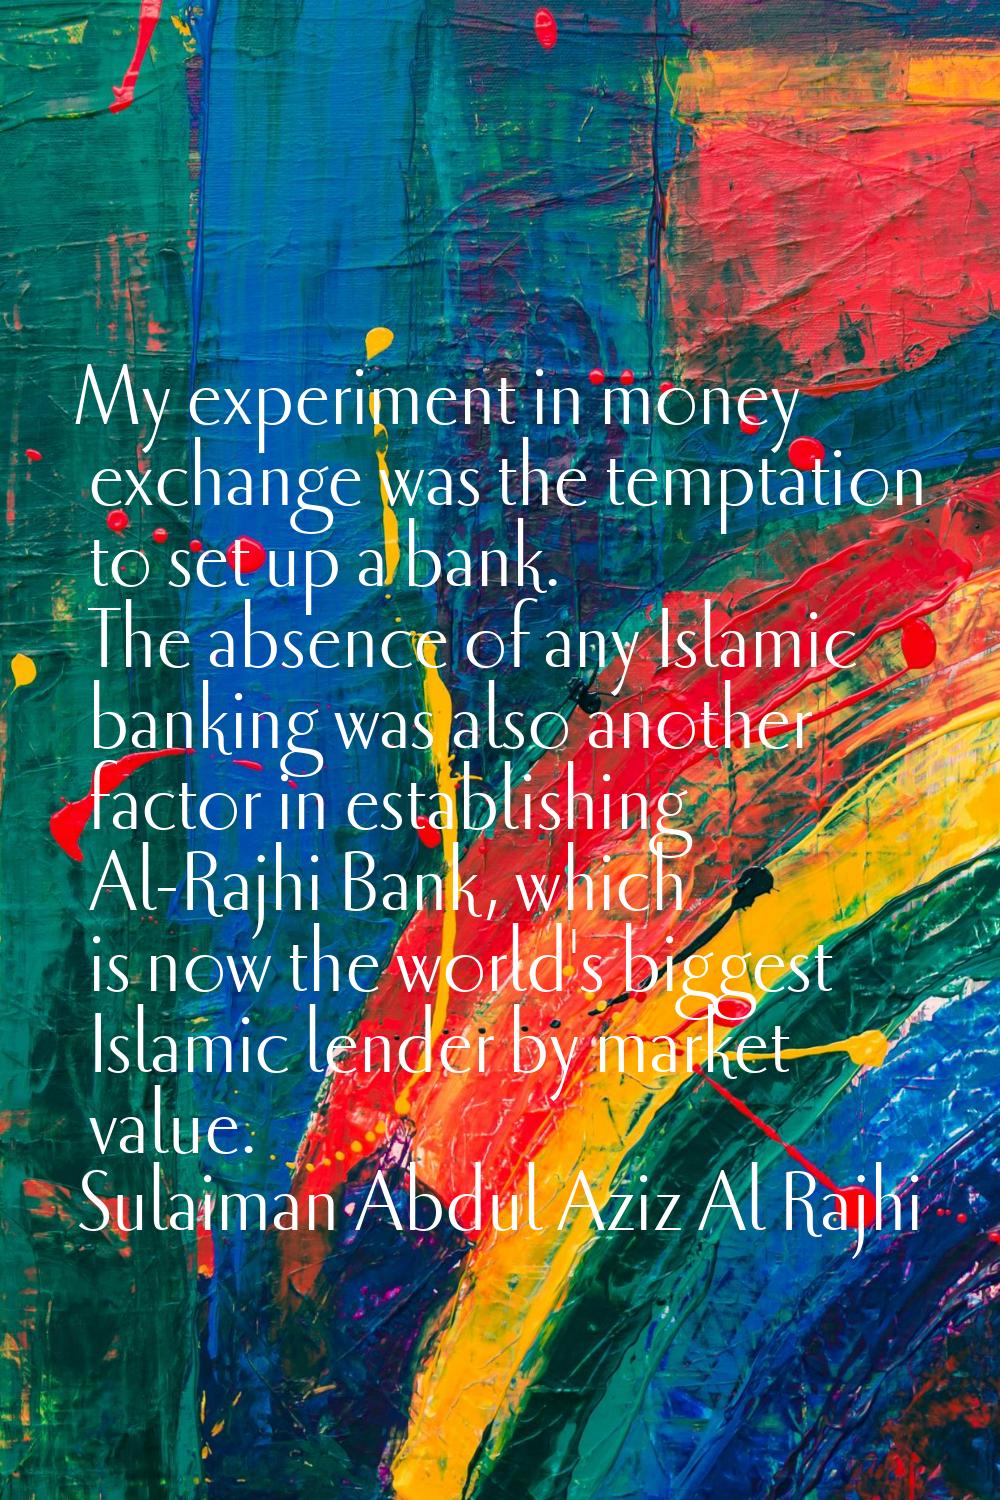 My experiment in money exchange was the temptation to set up a bank. The absence of any Islamic ban